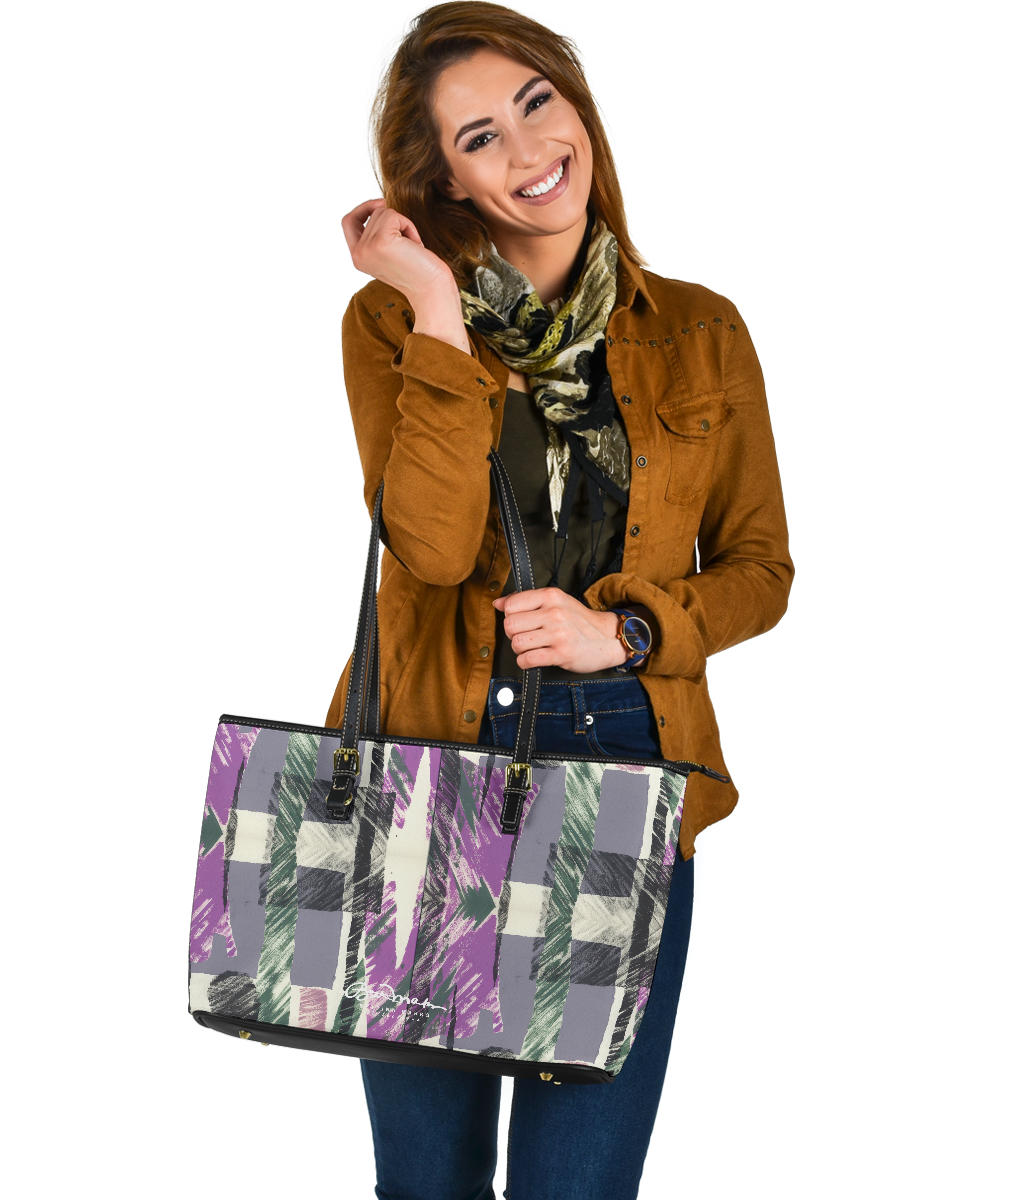 Abstract Collage Large Tote Bag